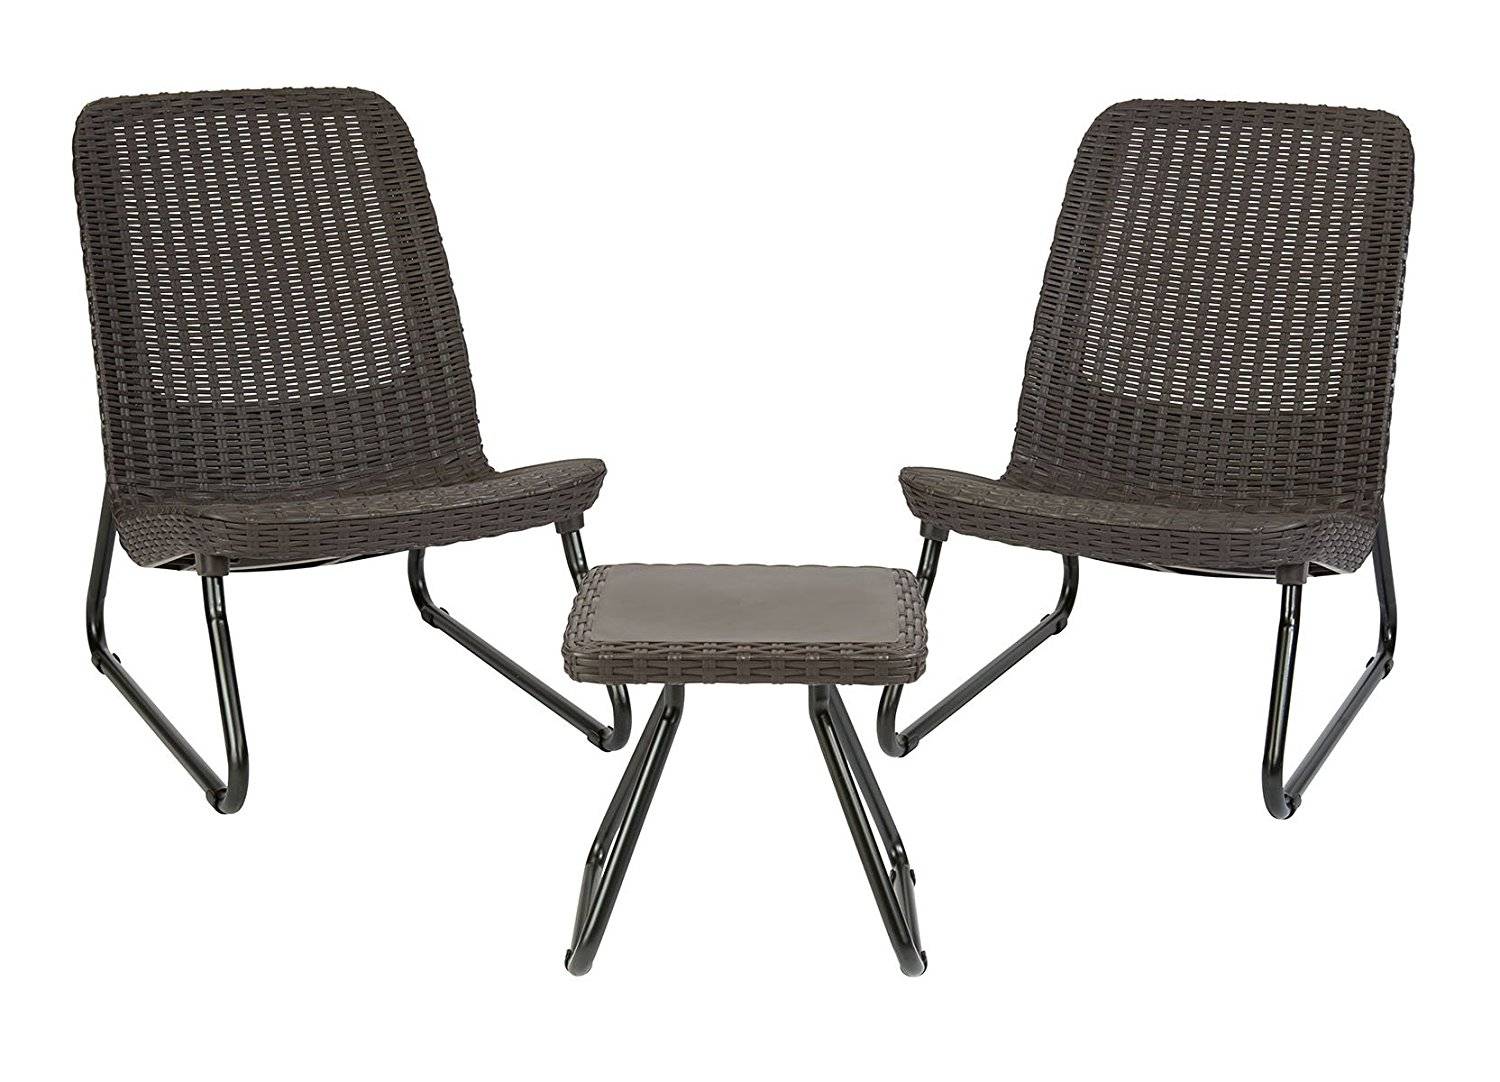 Keter Rio Brown 3 Pc All Weather Outdoor Patio Conversation Furniture